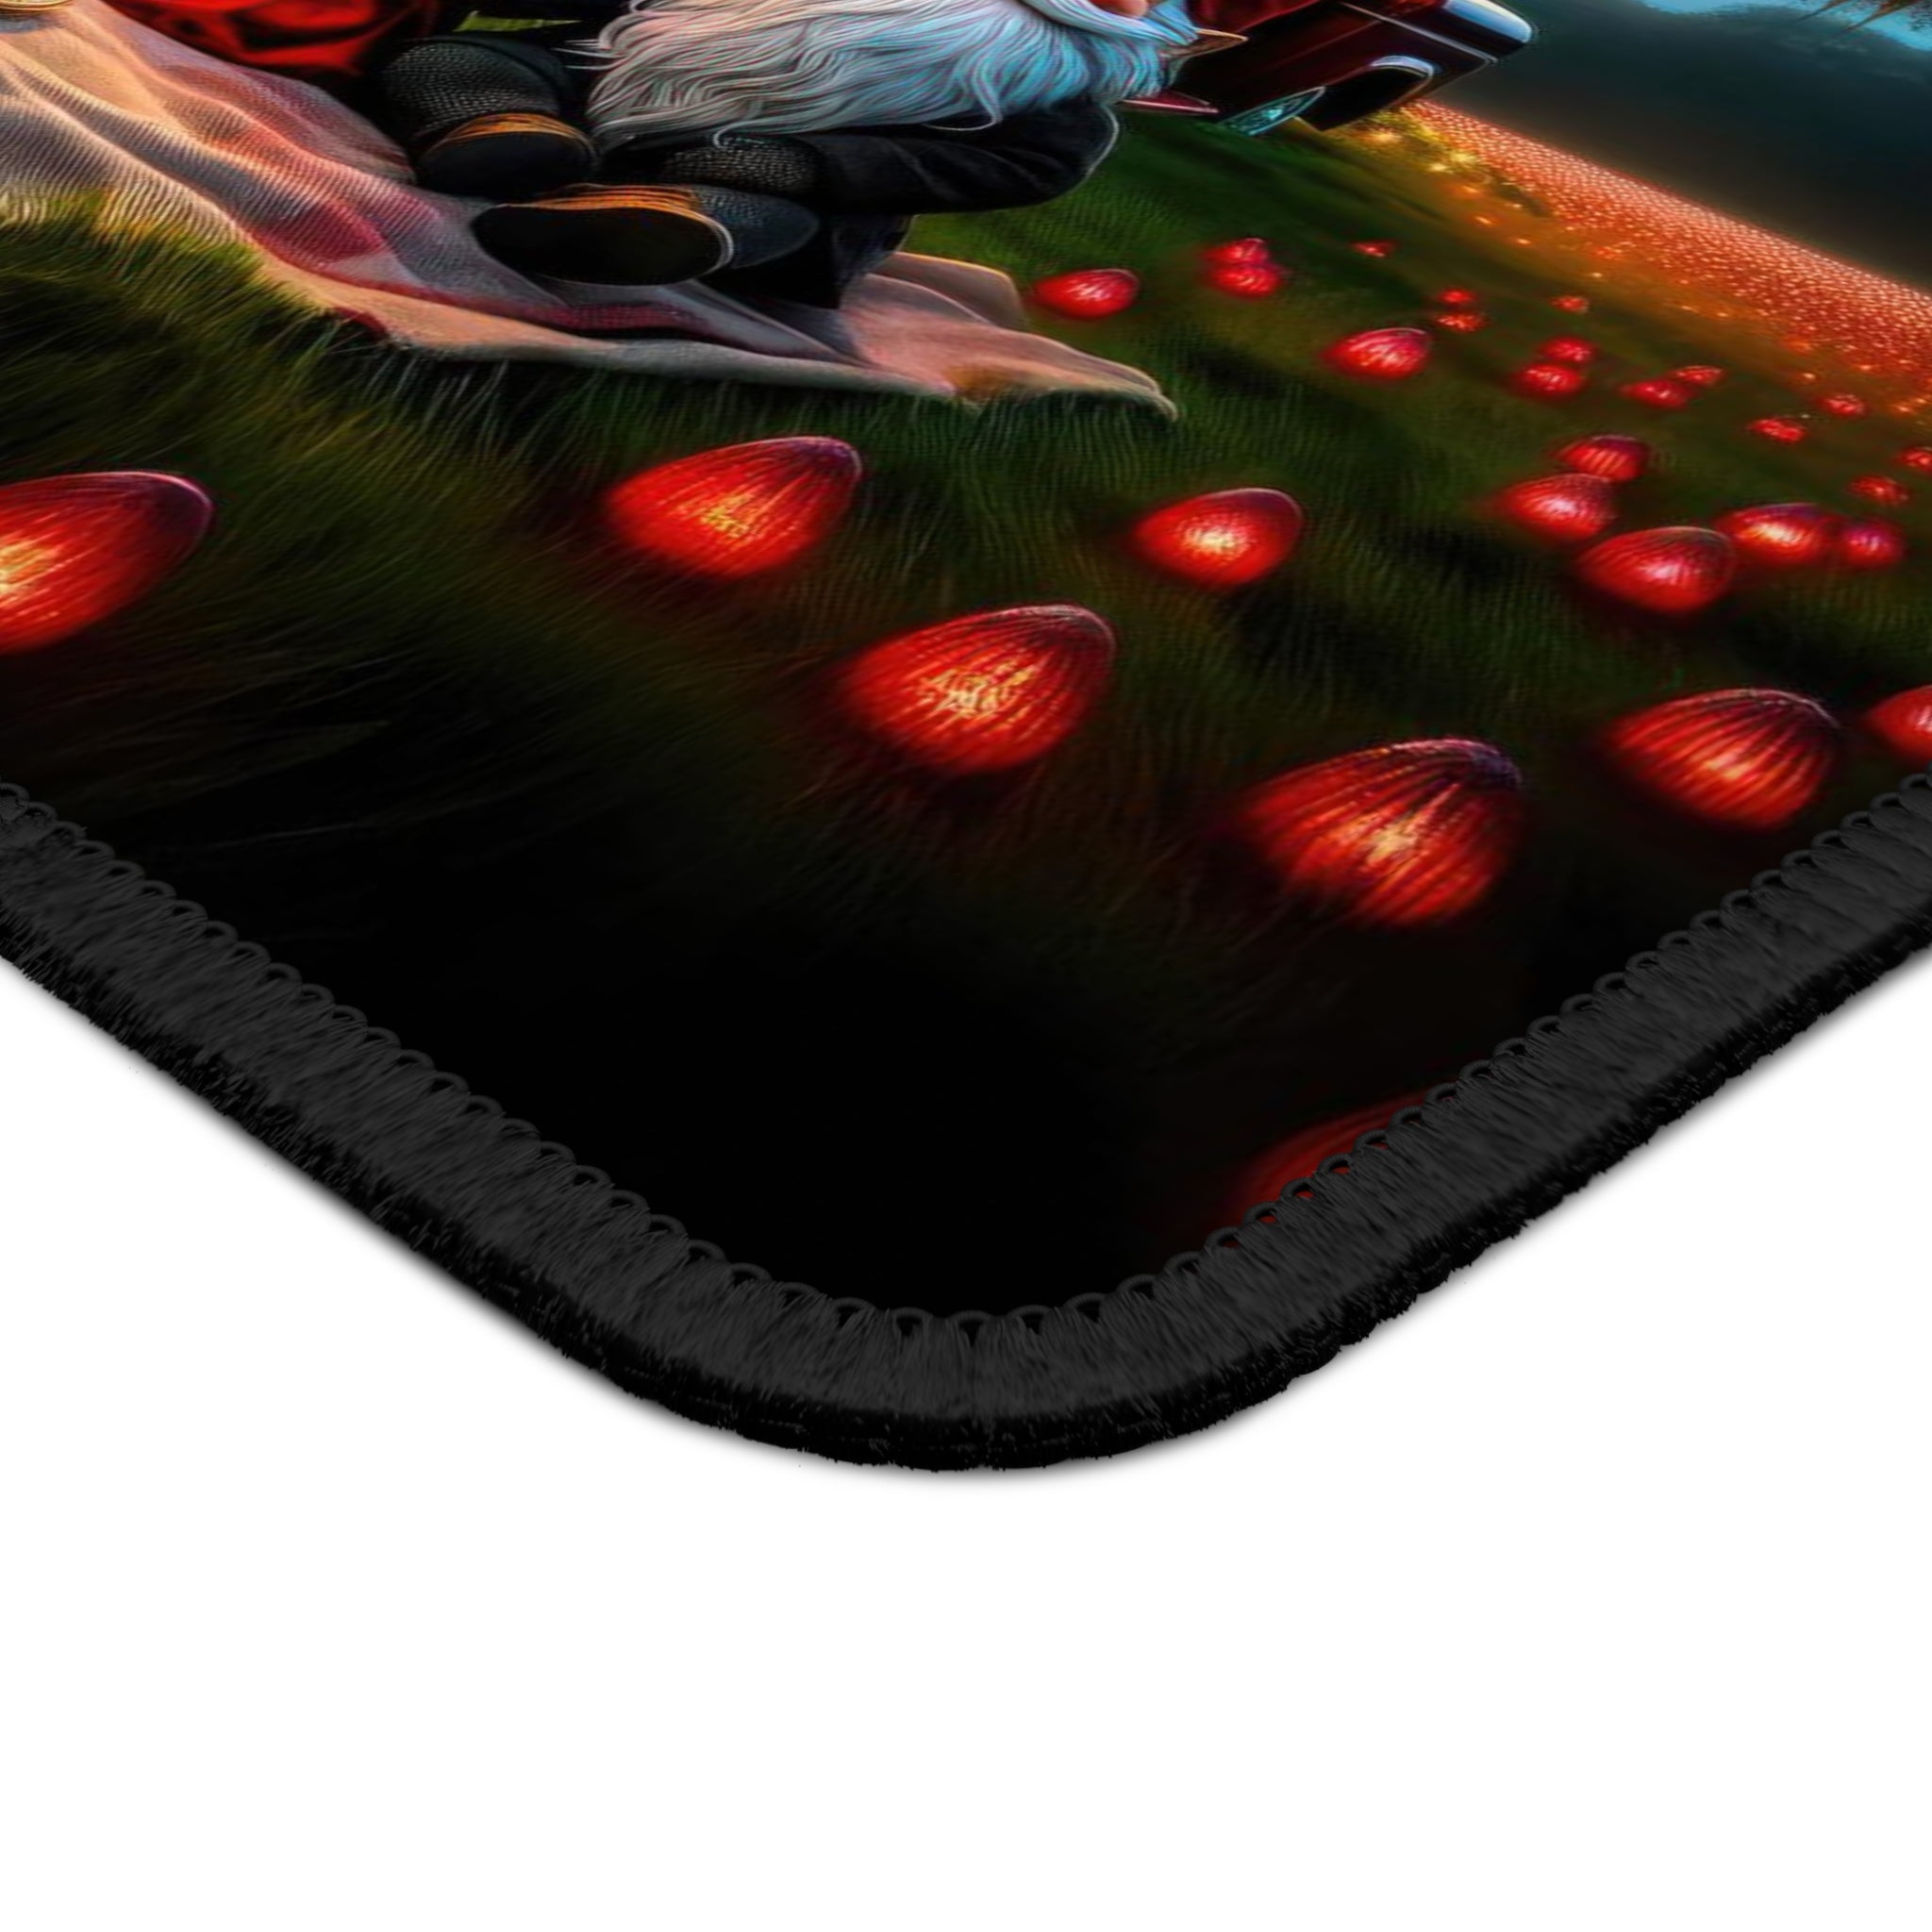 Lulu and Gigglefoot's Romantic Valentine Gaming Mouse Pad